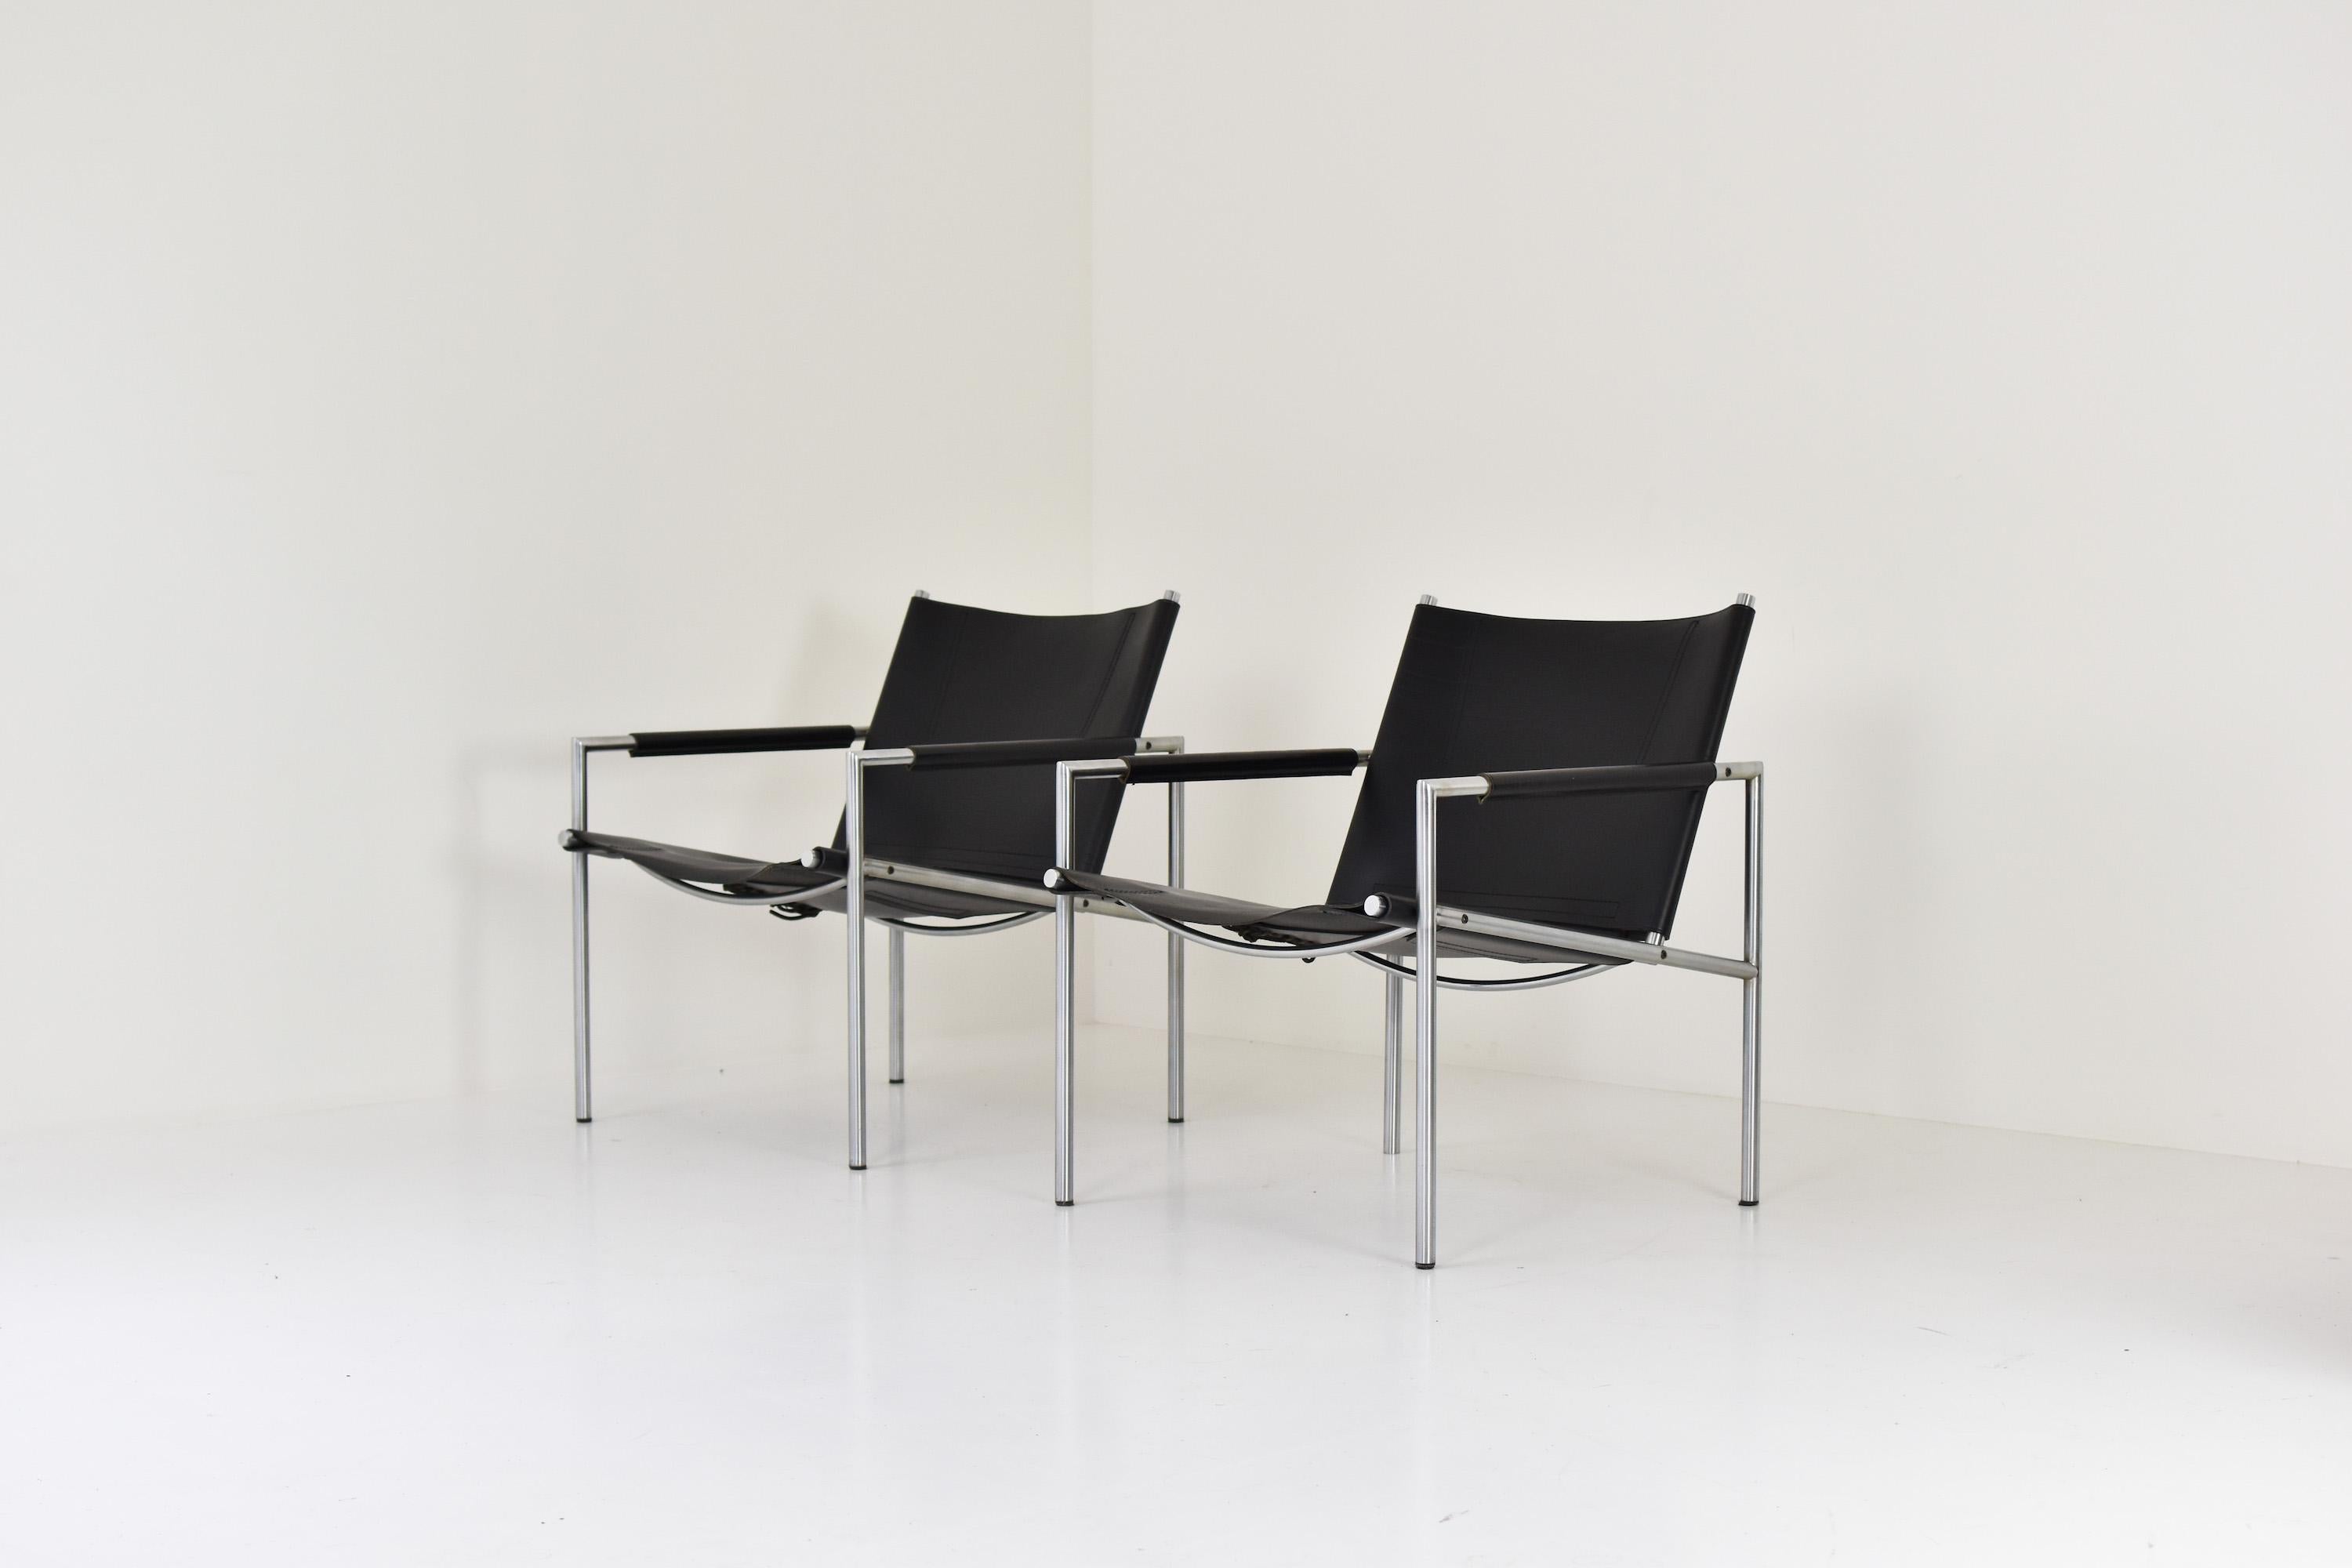 Set of 2 ‘SZ02’ easy chairs by Martin Visser for ‘t Spectrum, The Netherlands 1960s. These chairs features a tubular brushed steel frame and black leather seats. Good original condition with only minor wear. Very modern and elegant design.